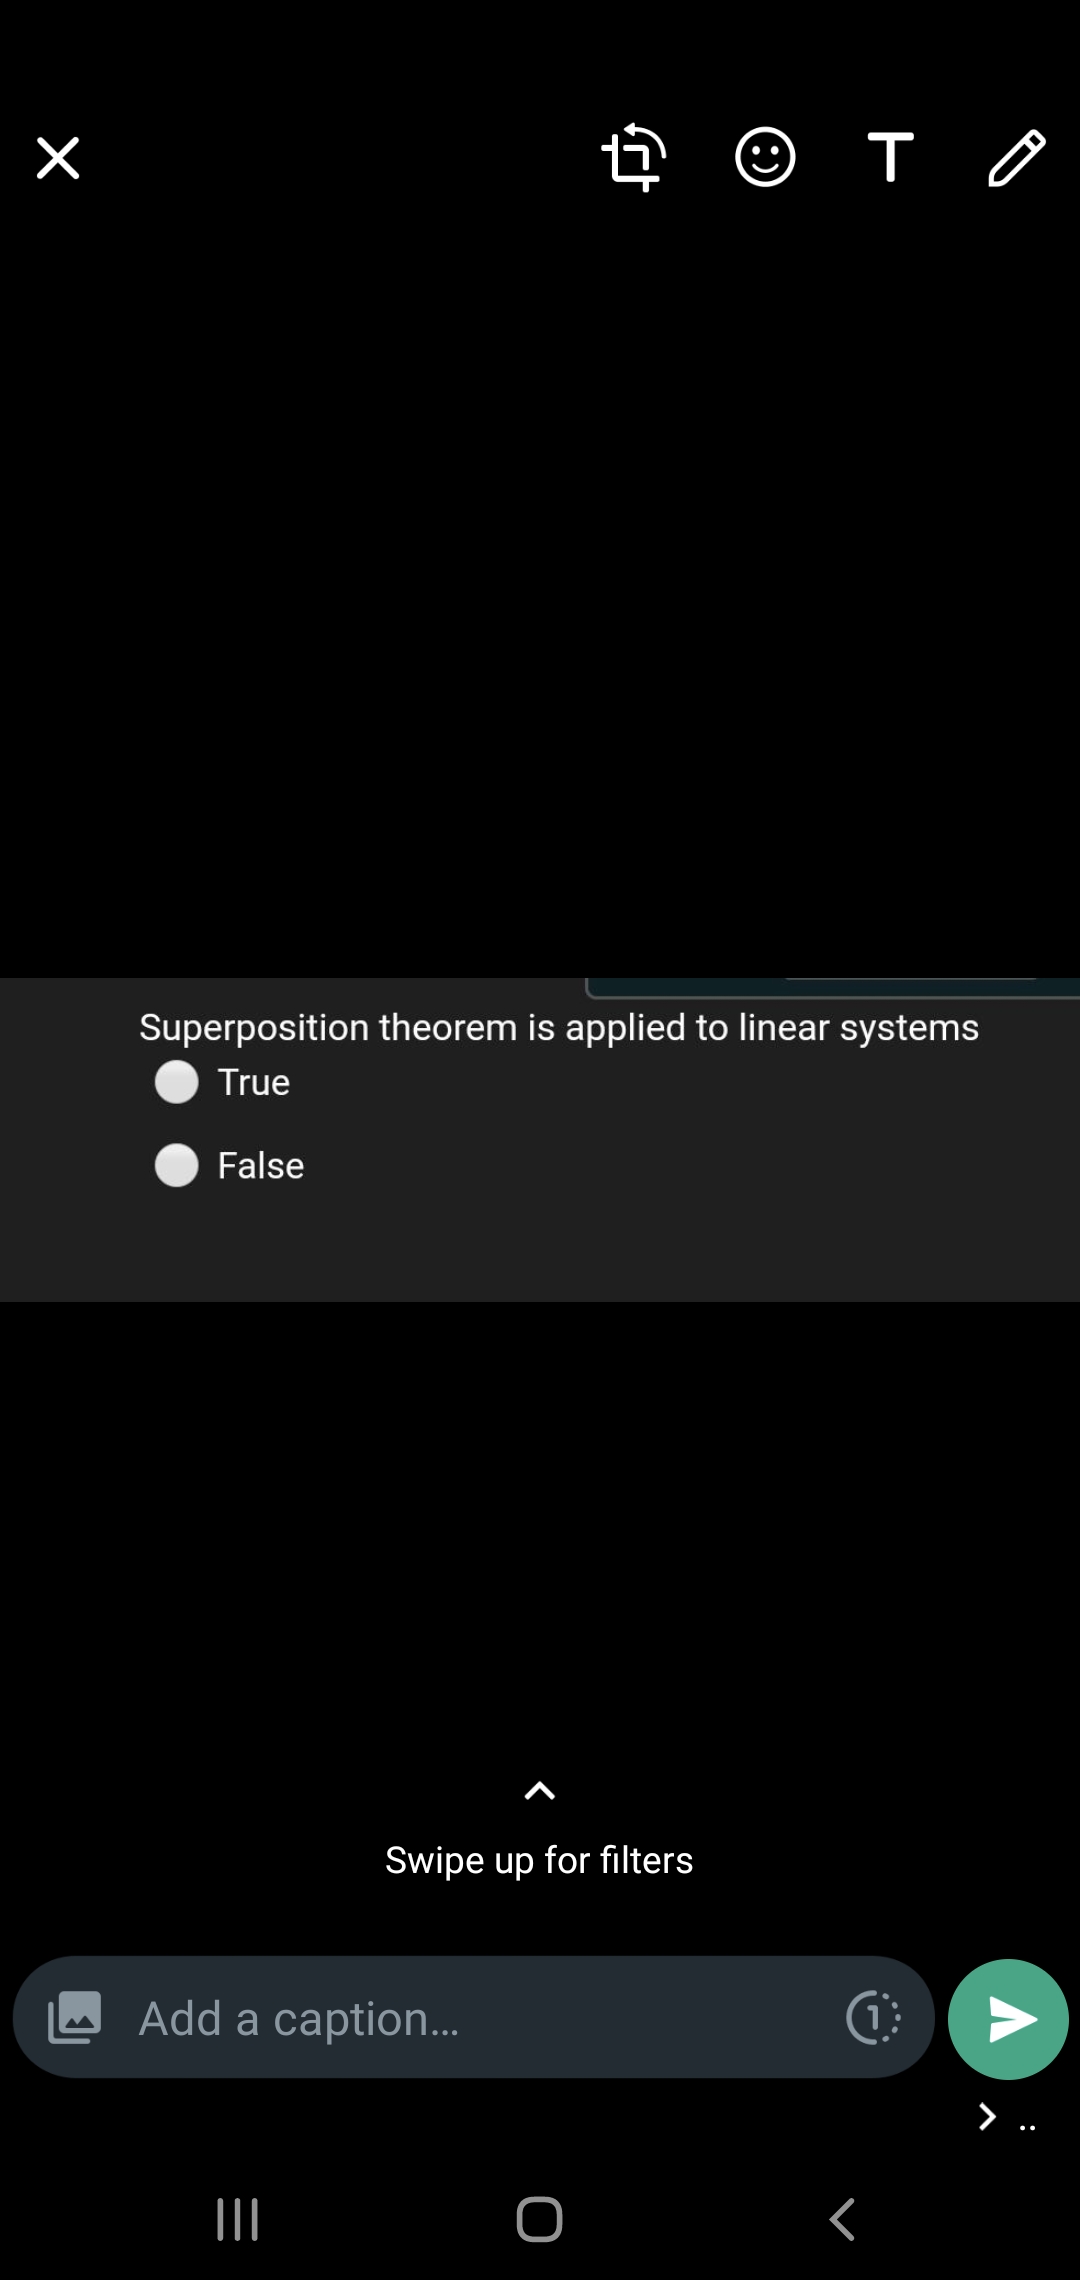 Superposition theorem is applied to linear systems
True
False
Swipe up for filters
Add a caption...
>
II
